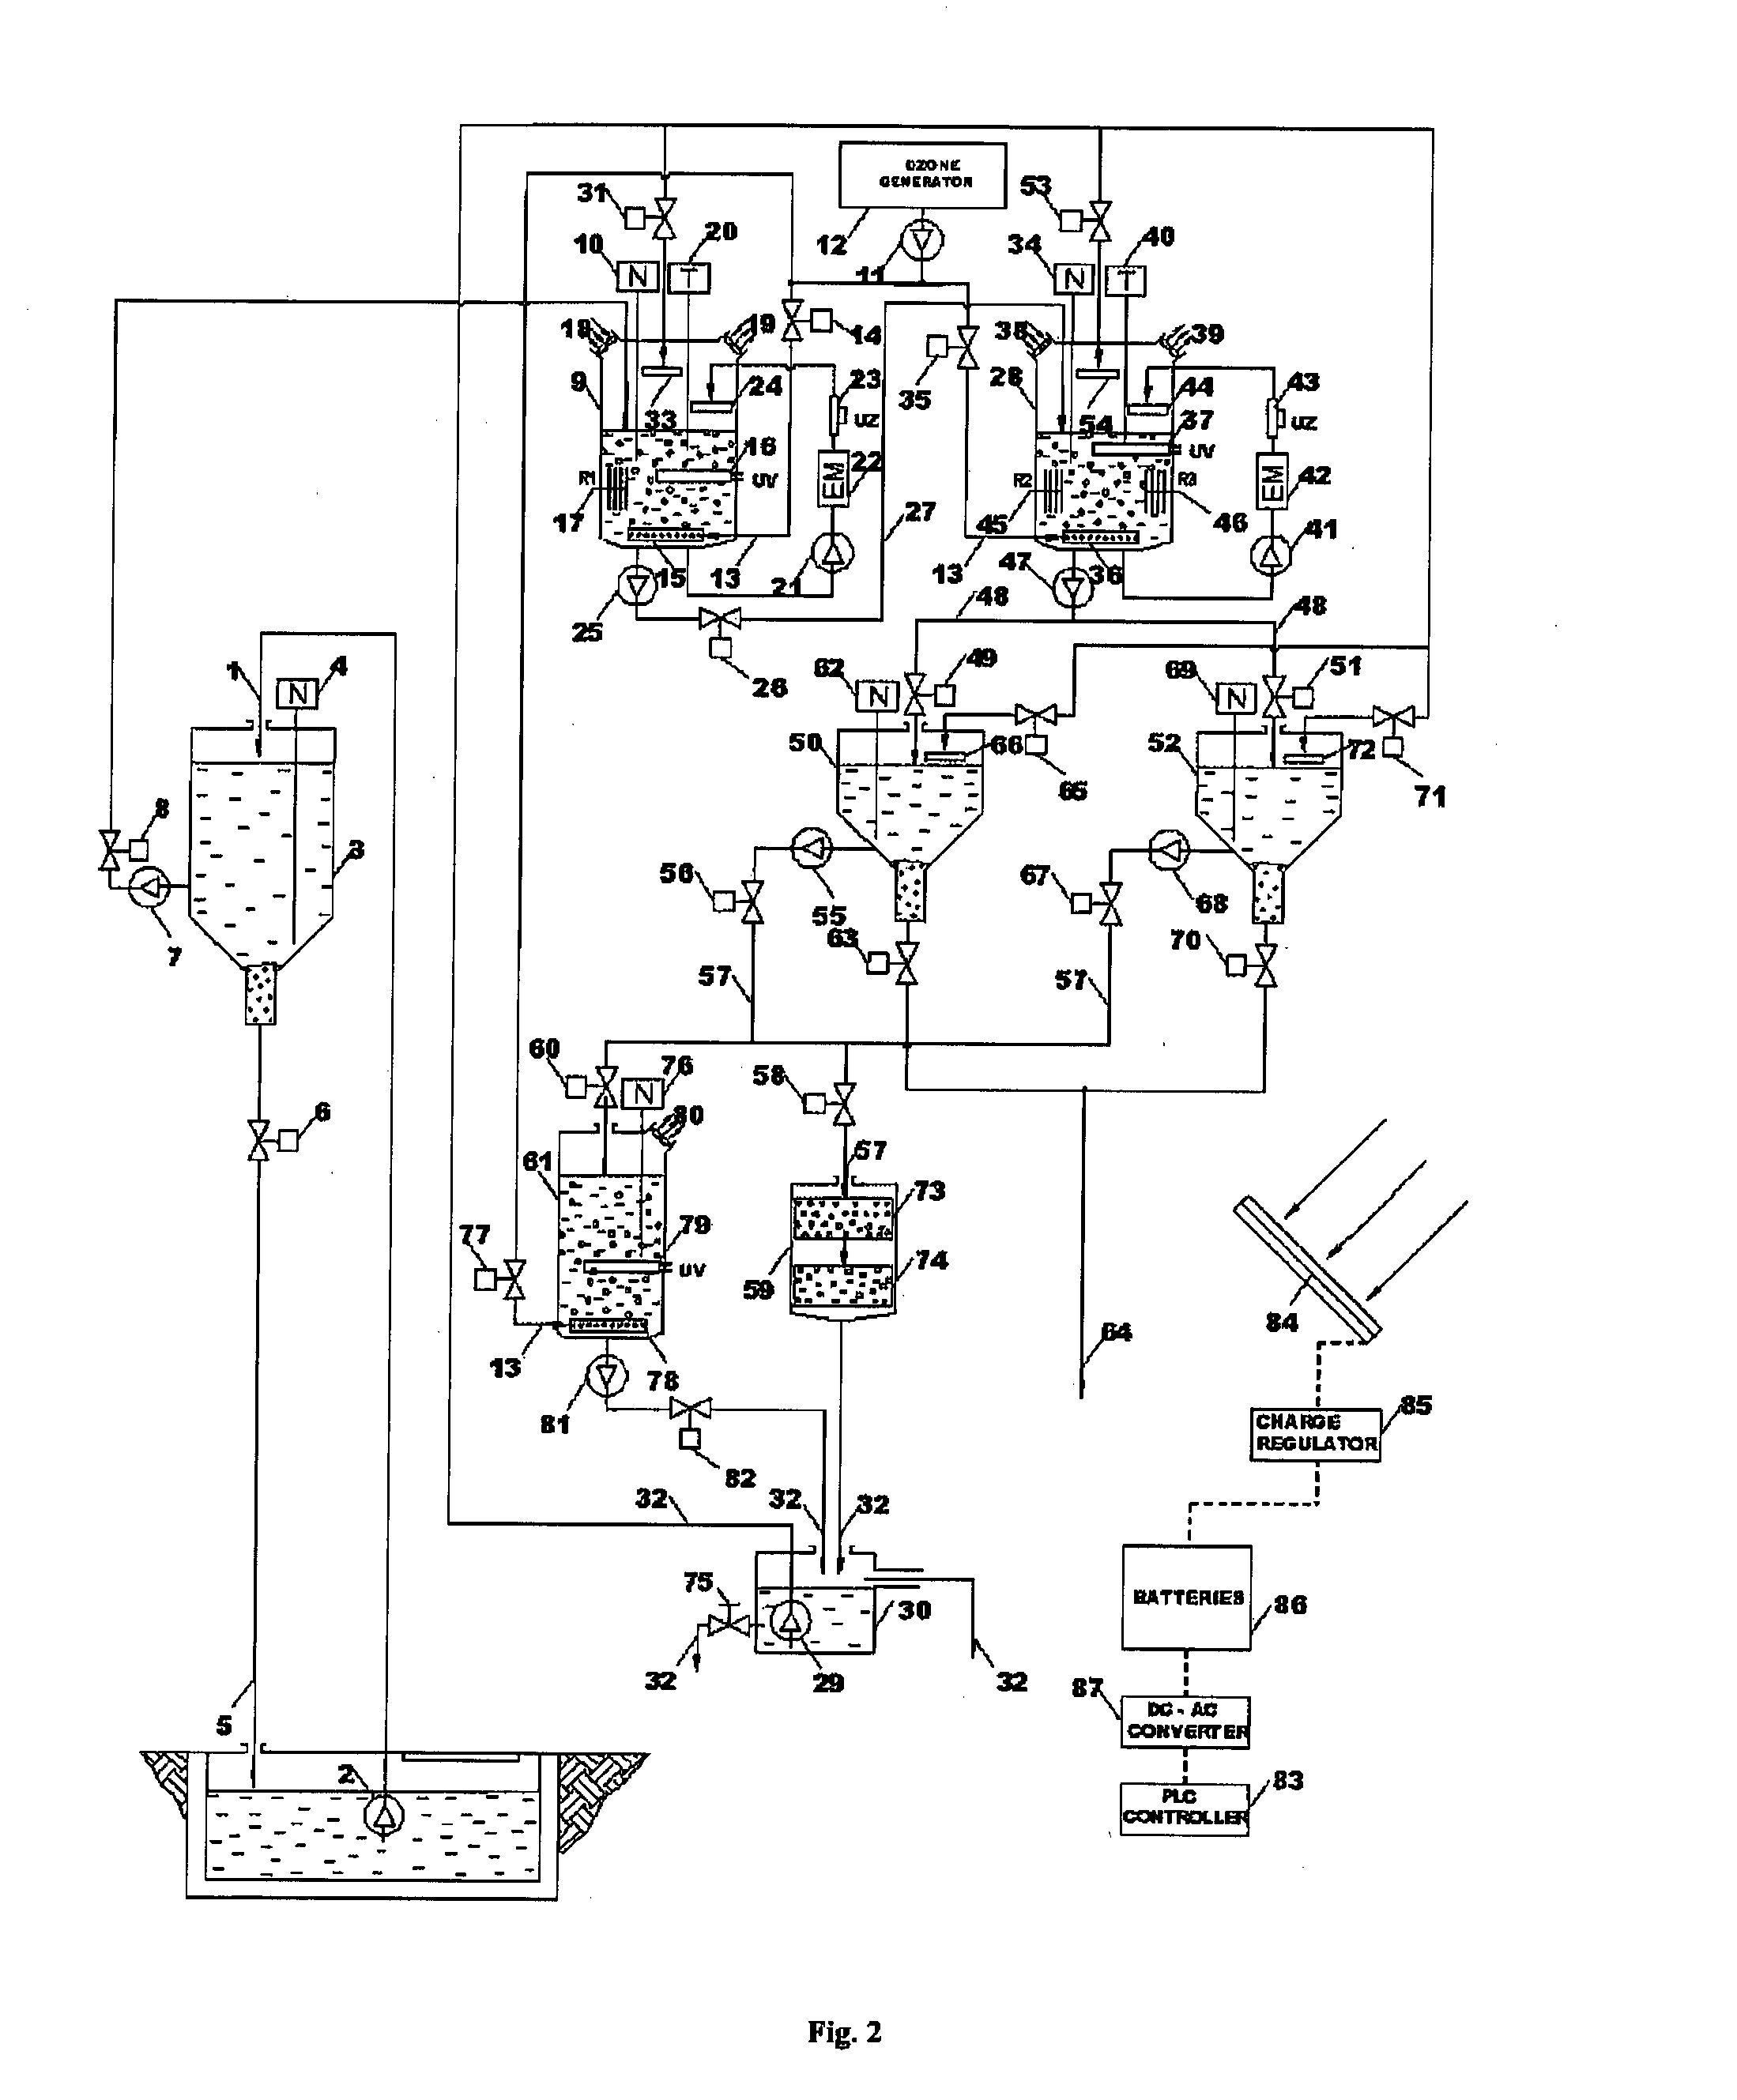 Process and device for electrochemical treatment of industrial wastewater and drinking water